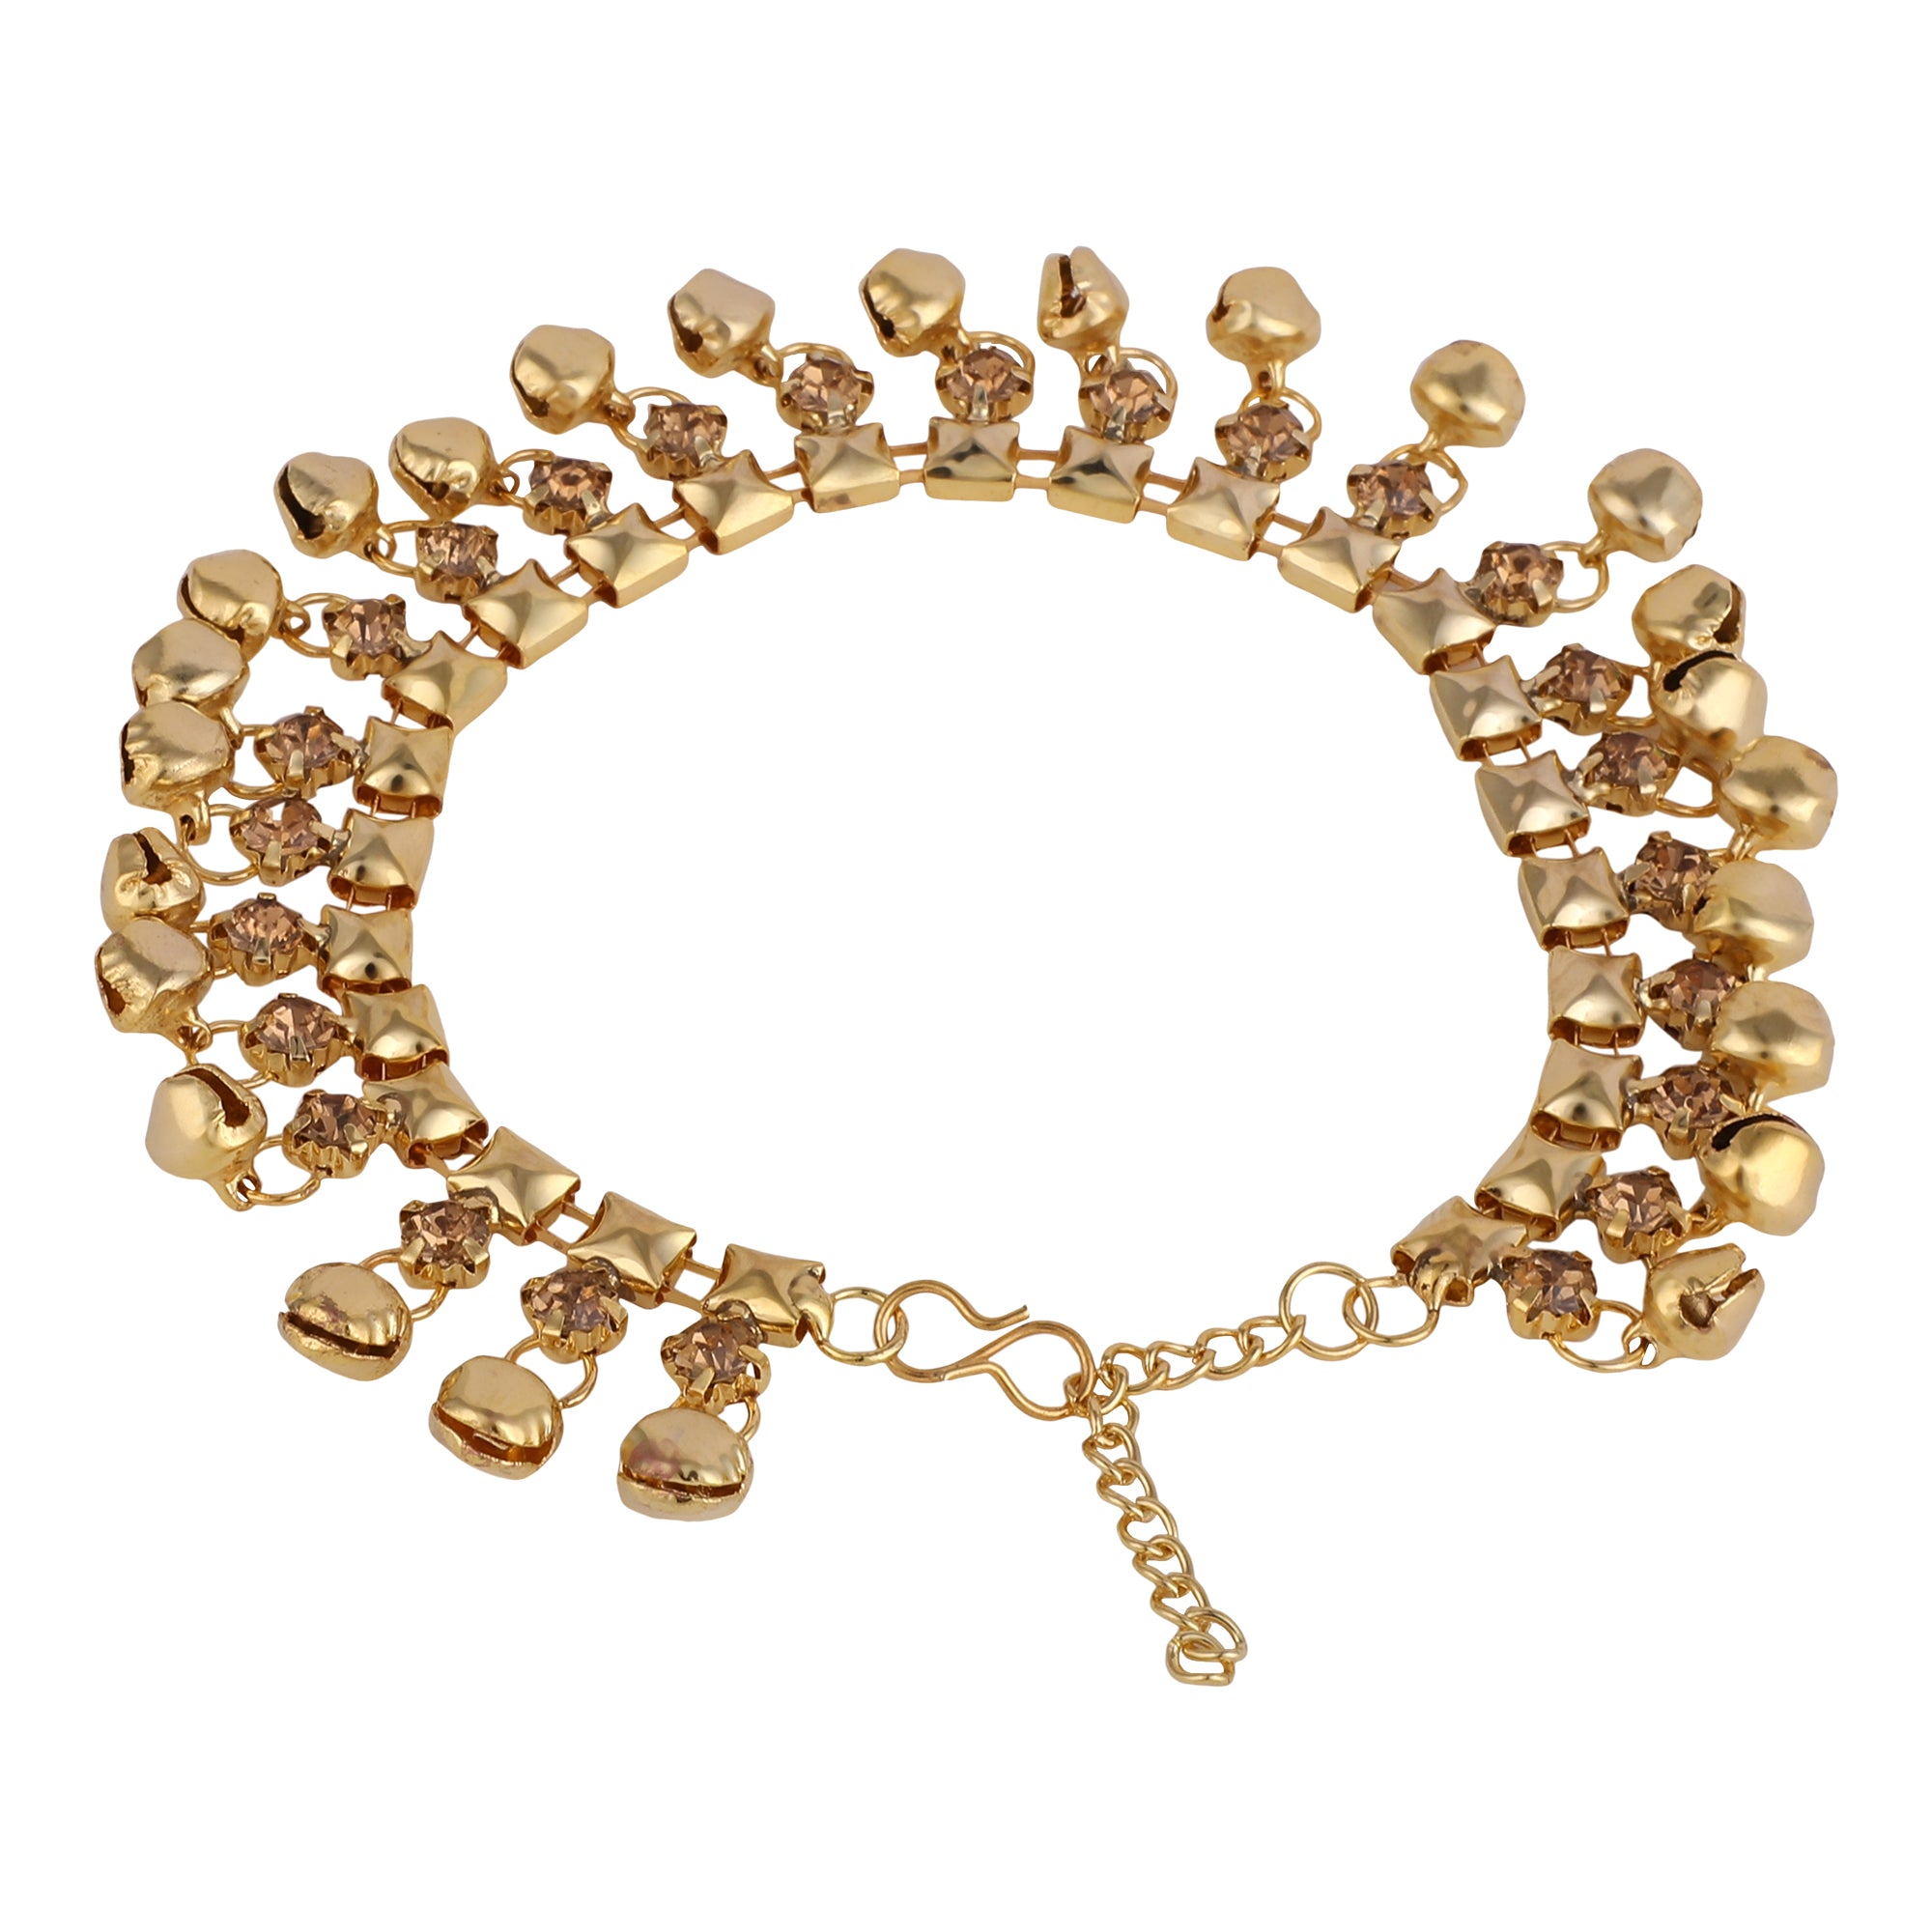 Women's Metallic Gold Ghungru Studded Statement Anklets - MODE MANIA